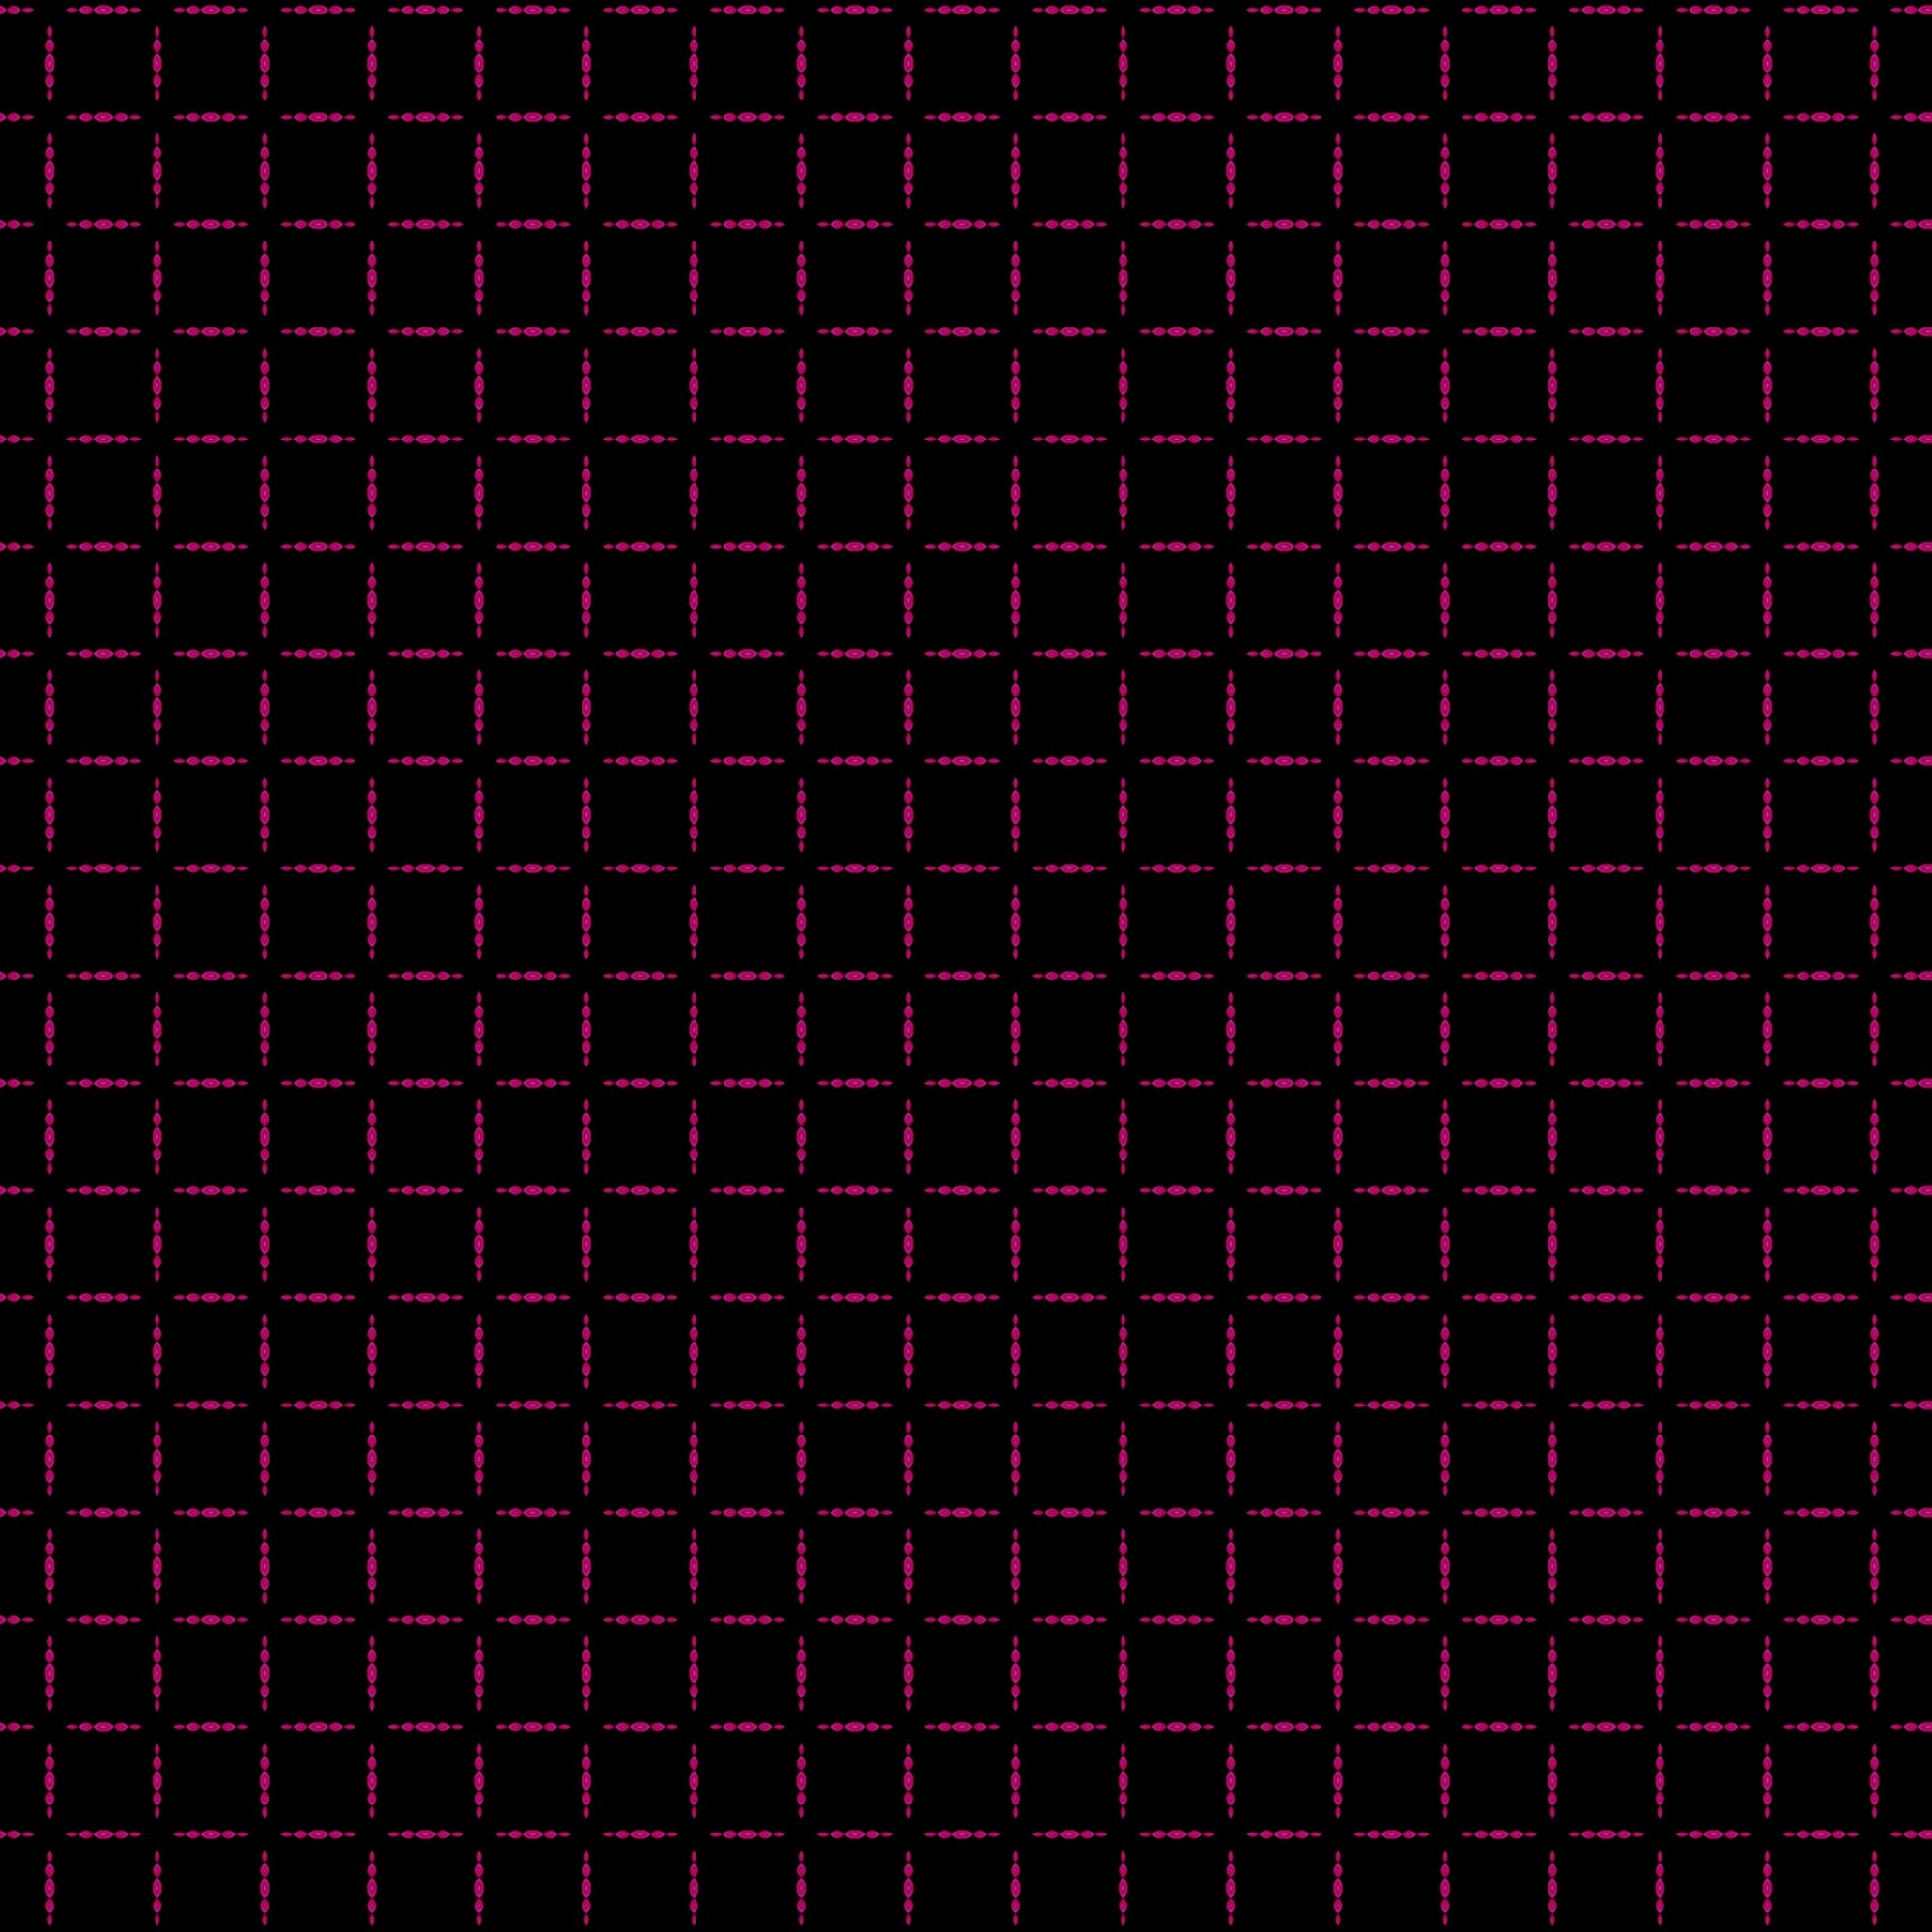 90832 download wallpaper patterns, black, pink, texture, textures, grid, lattice, trellis screensavers and pictures for free